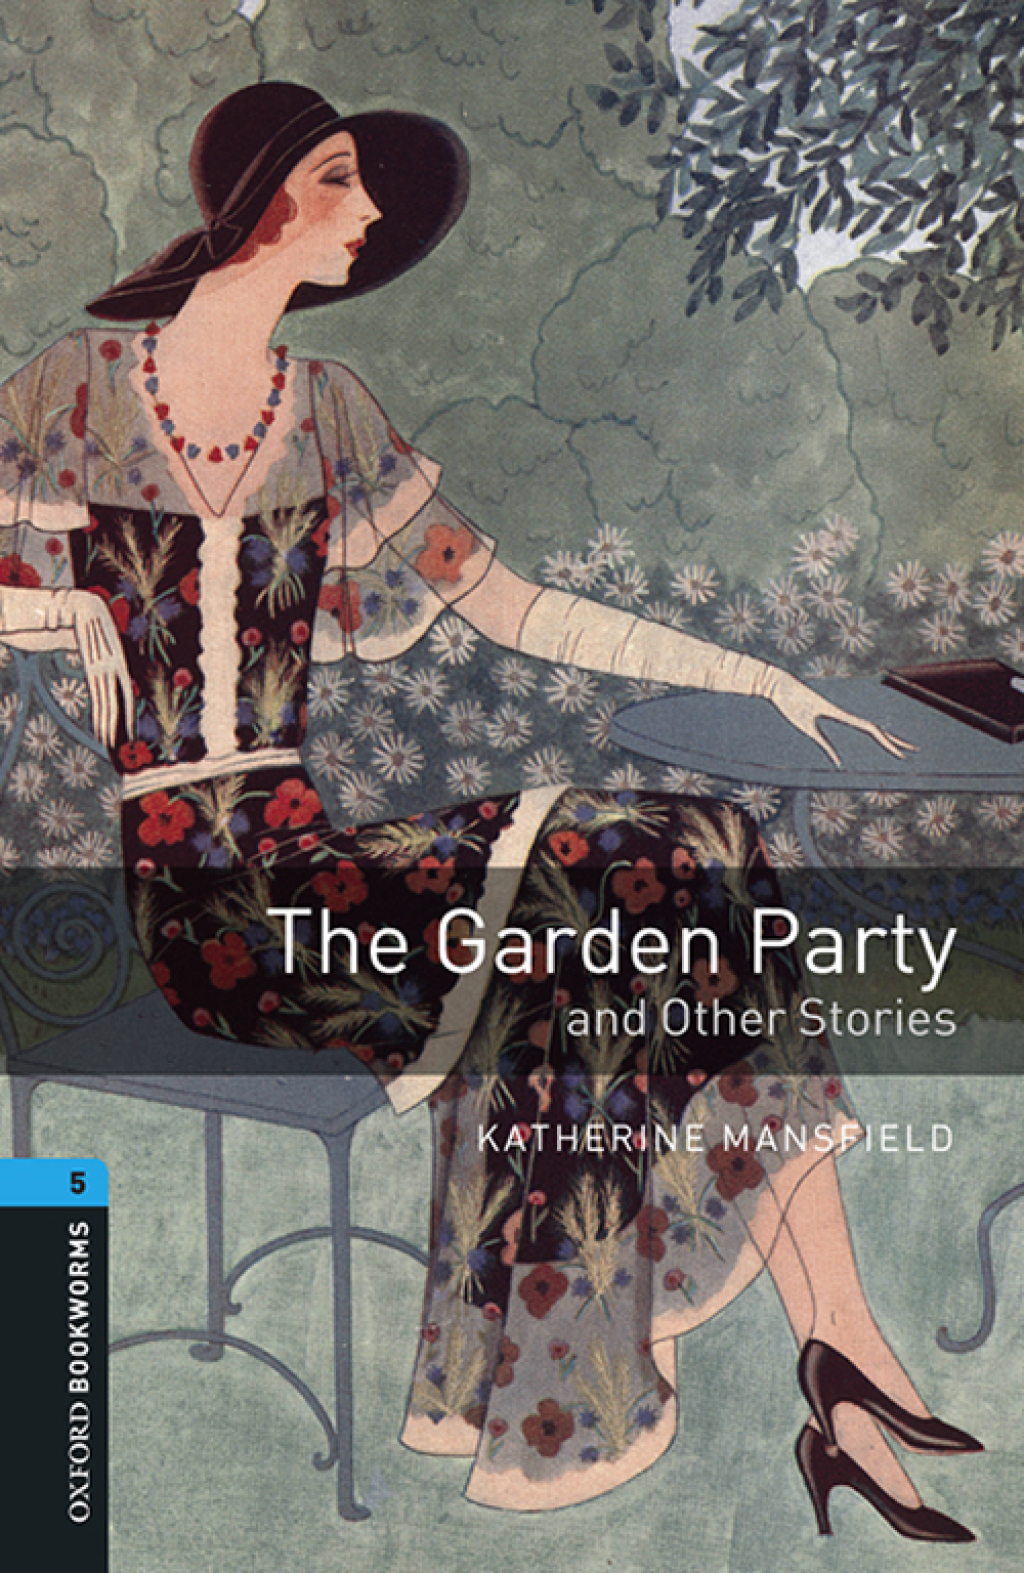 The Garden Party and Other Stories Level 5 Oxford Bookworms Library - 3rd Edition (eBook Rental)